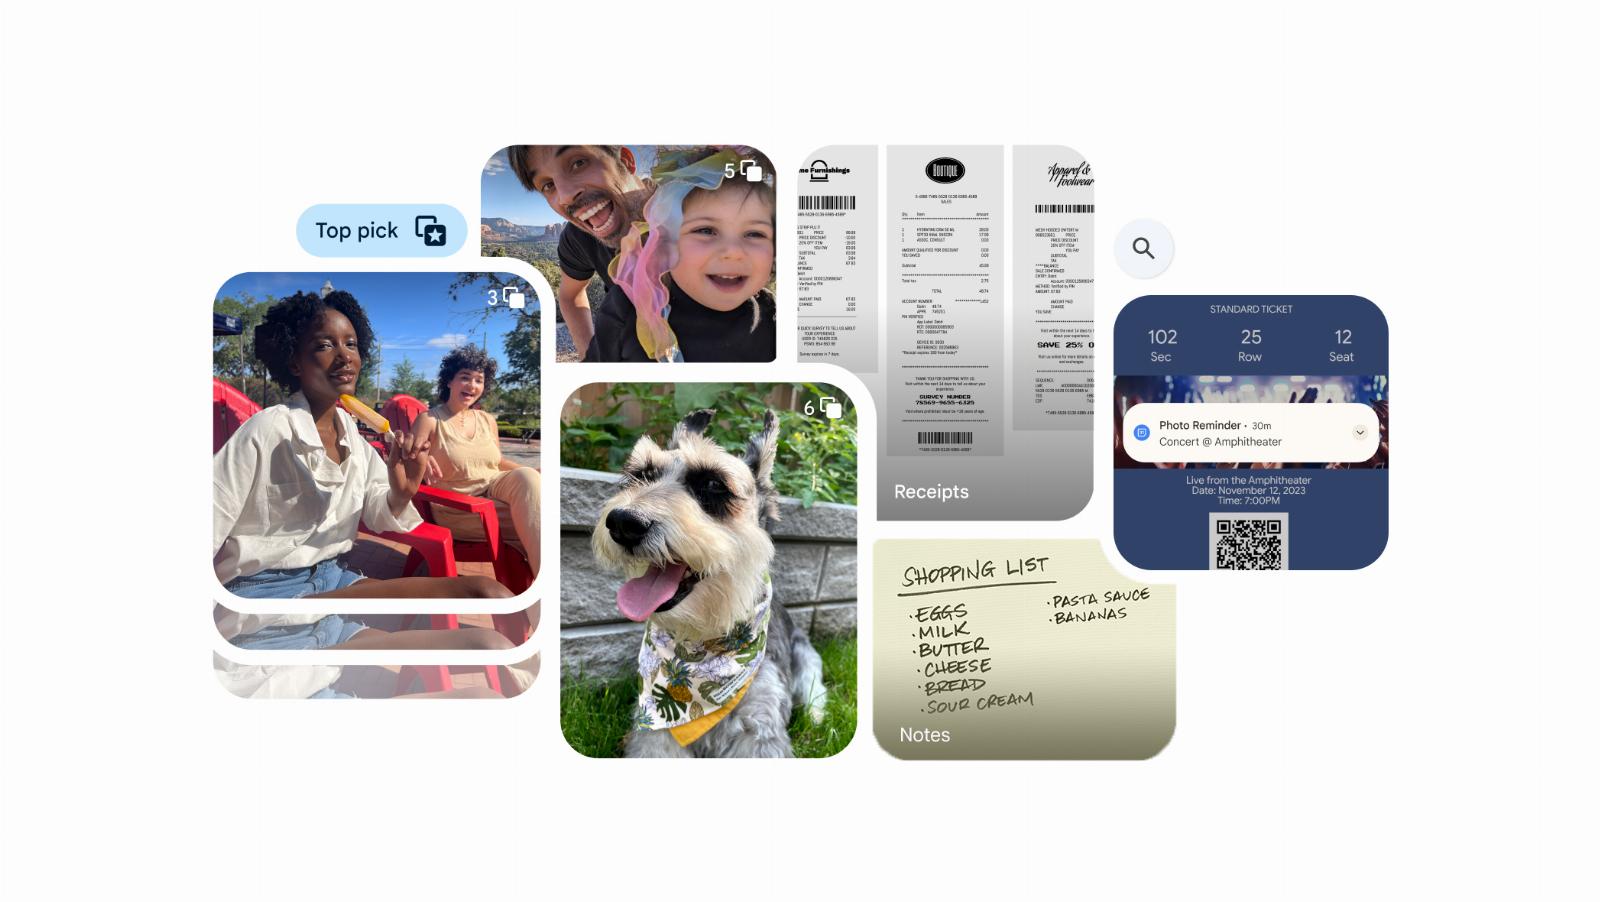 Google Photos turns to AI to organize and categorize your photos for you